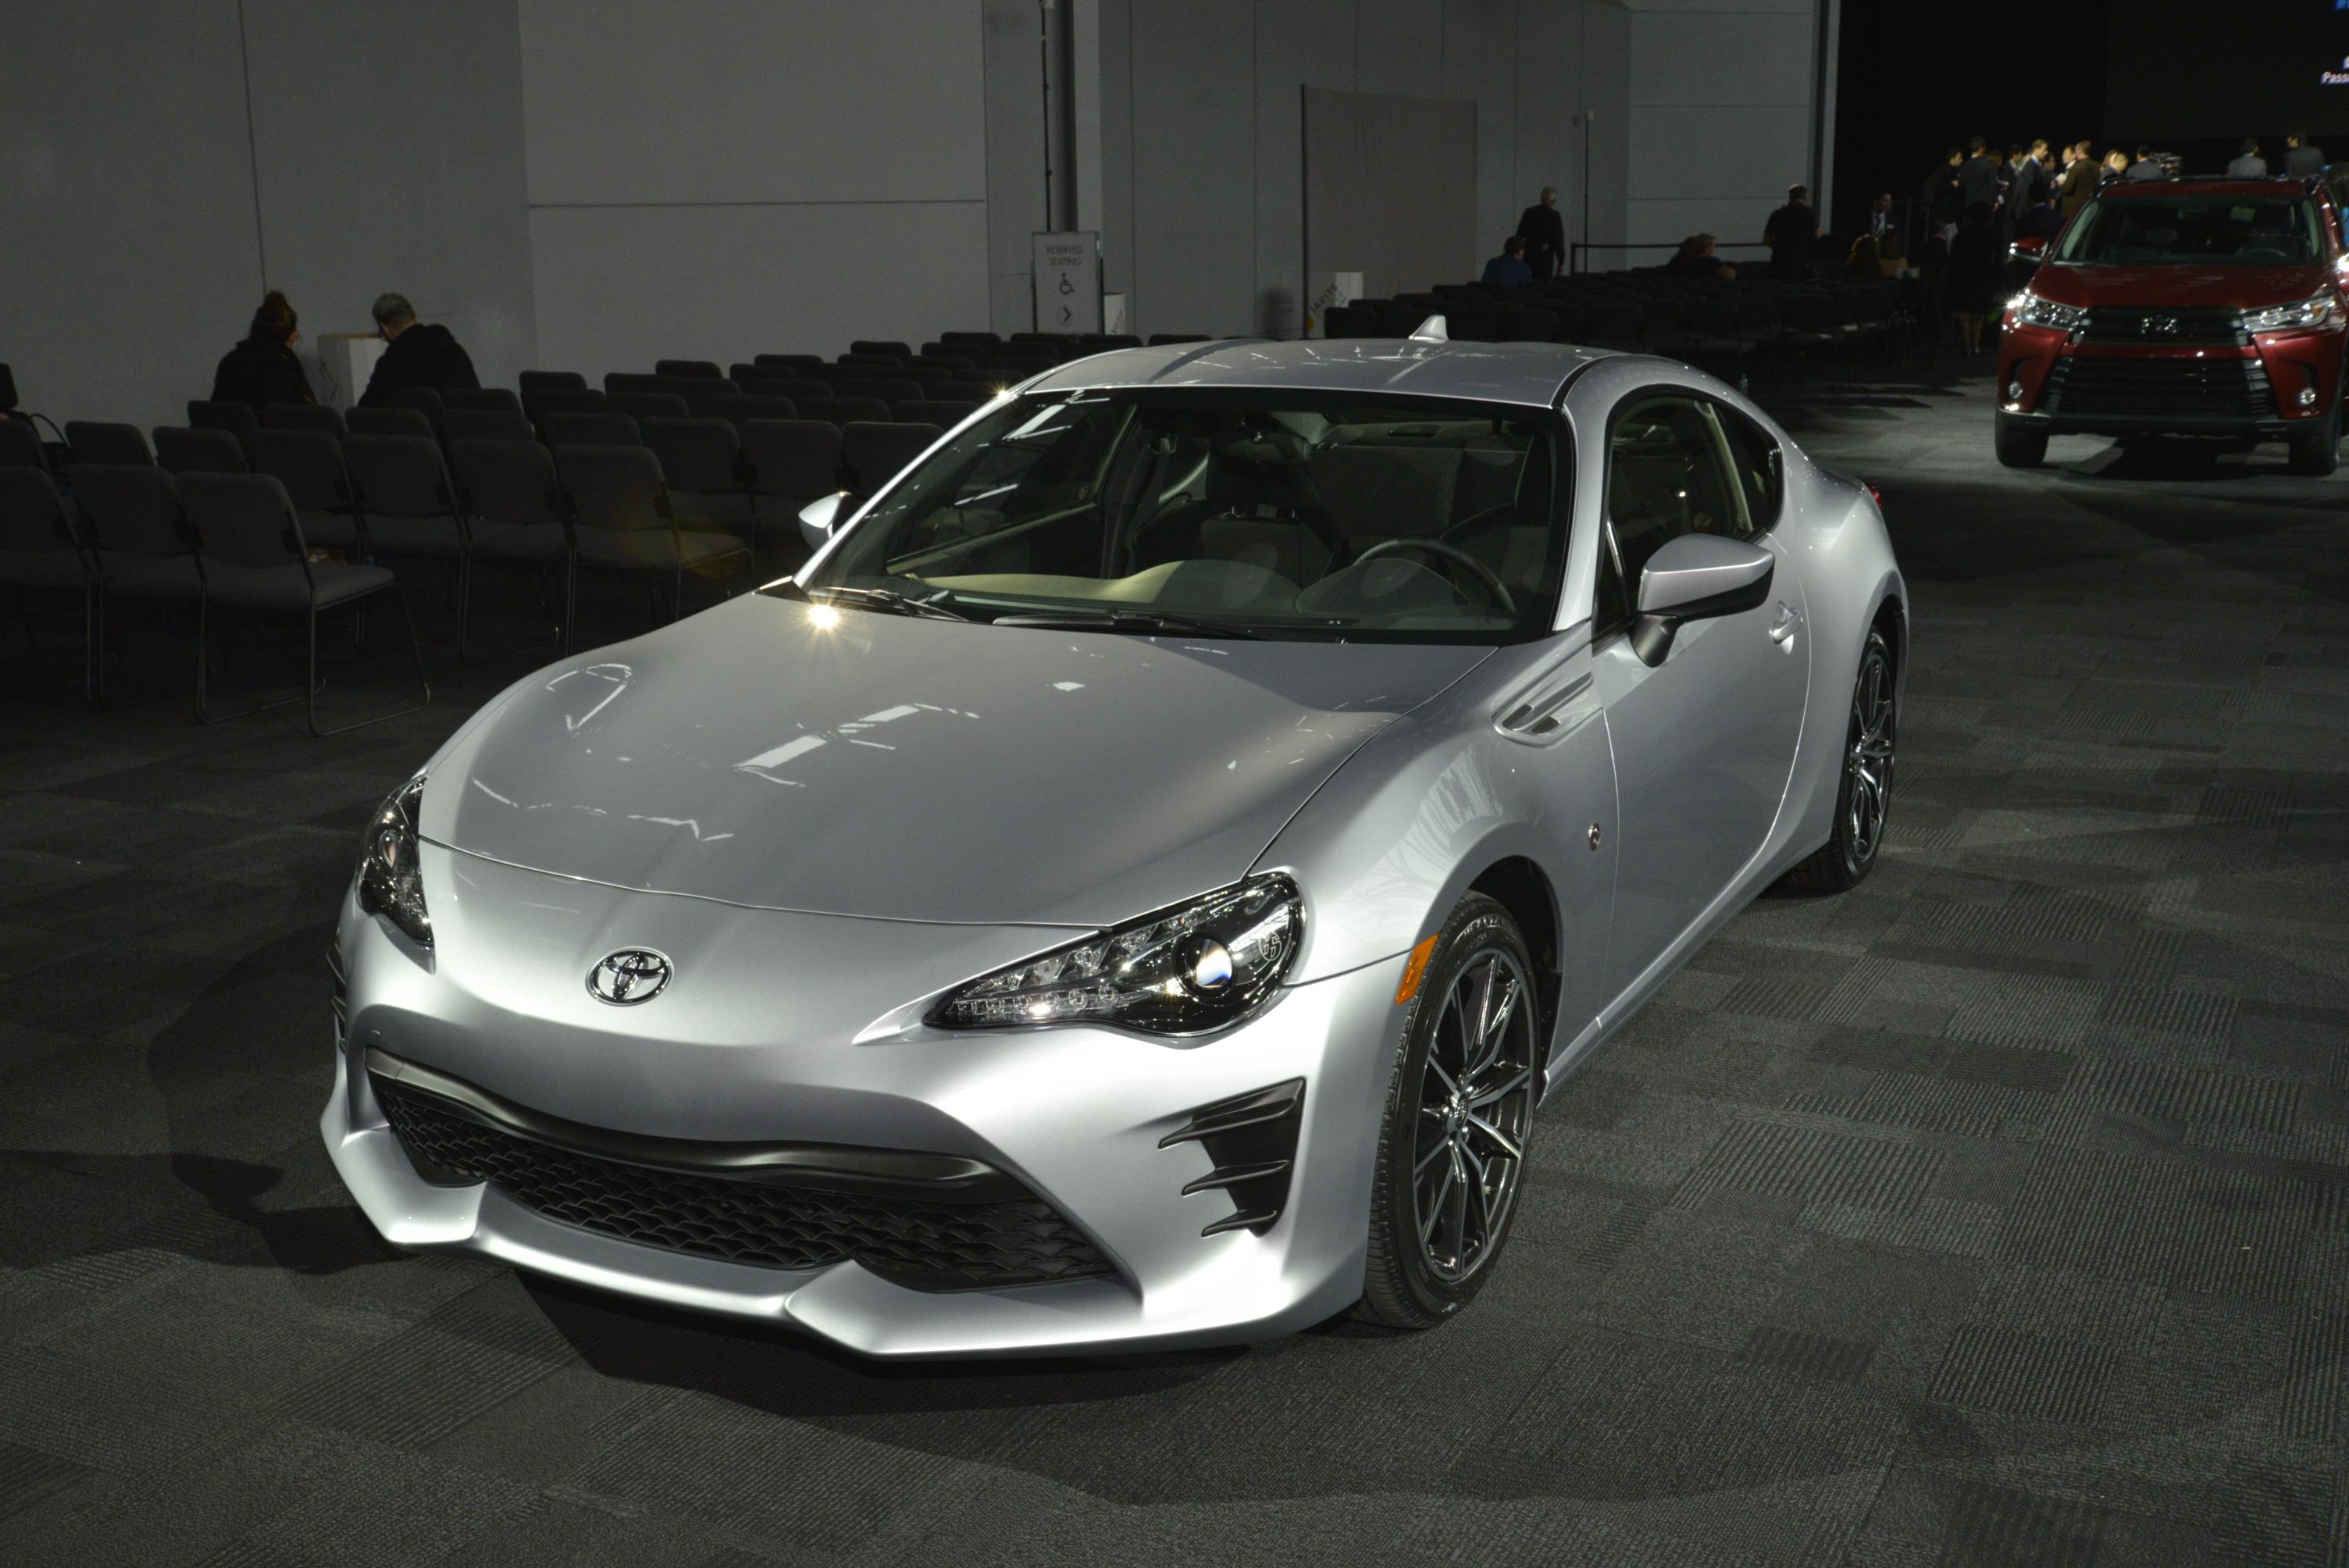 2017 Toyota 86 Puts an Angry Face On at the New York Auto Show